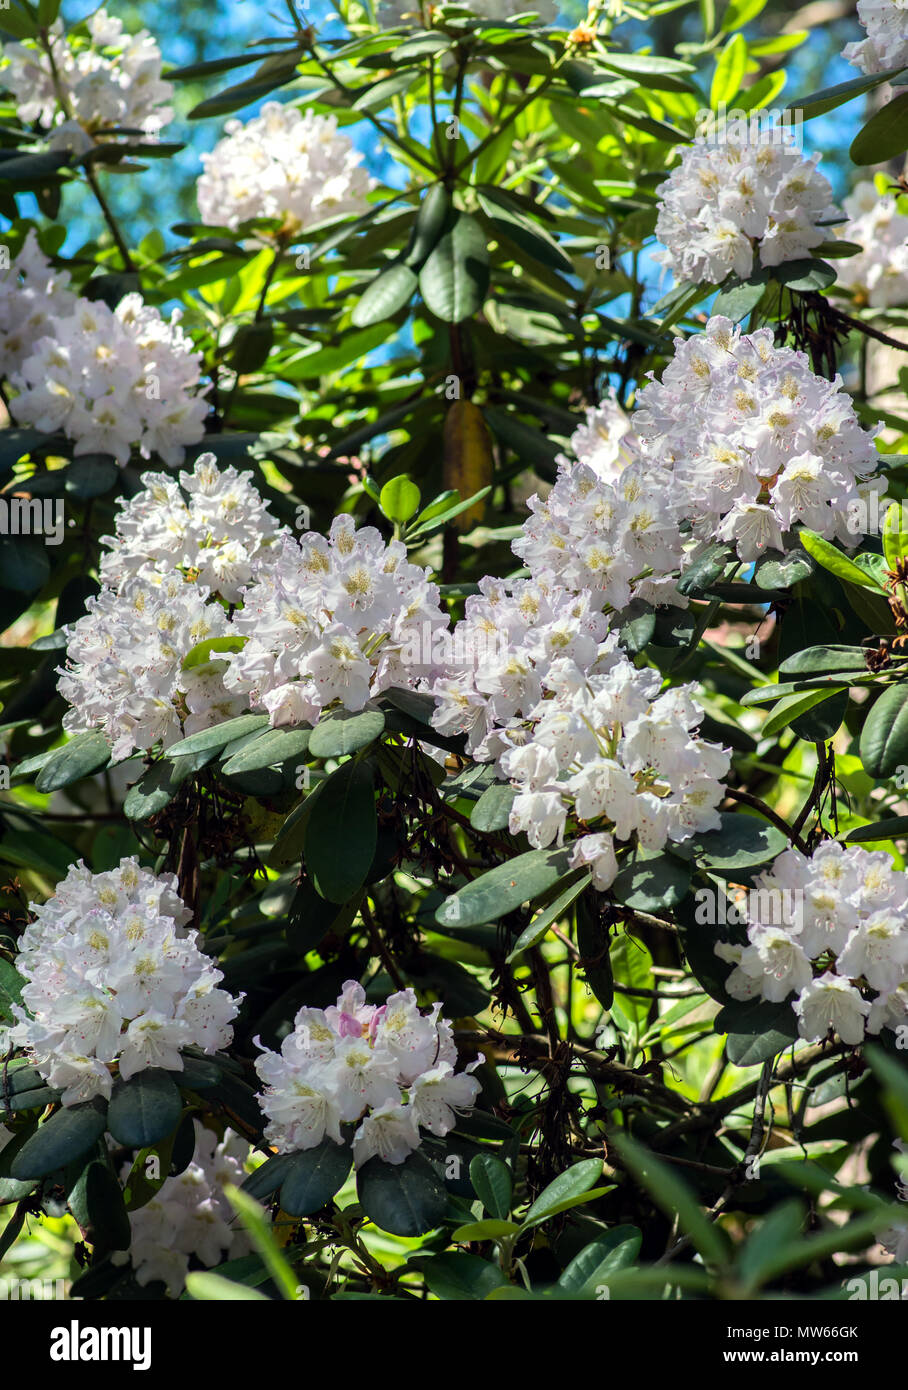 White Rhododendron flowers Stock Photo